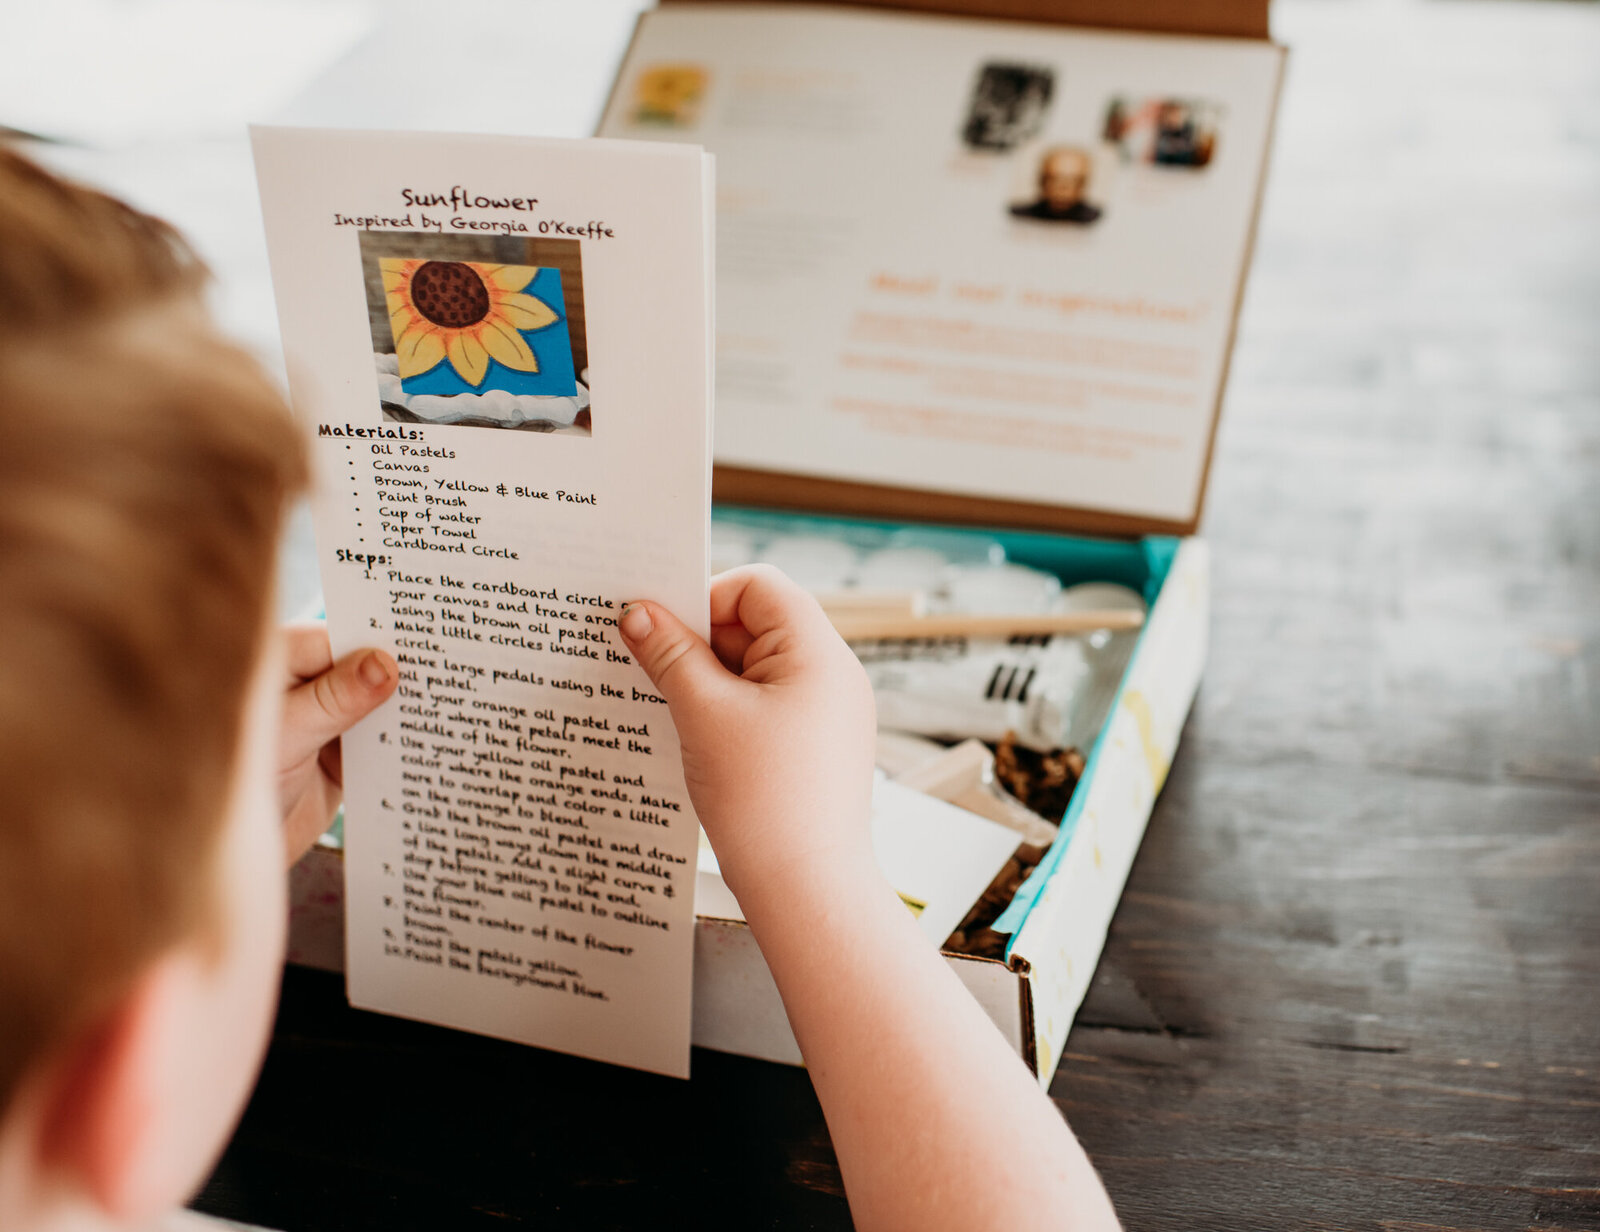 Branding Photographer, a child reviews instructions for a craft project from a craft box